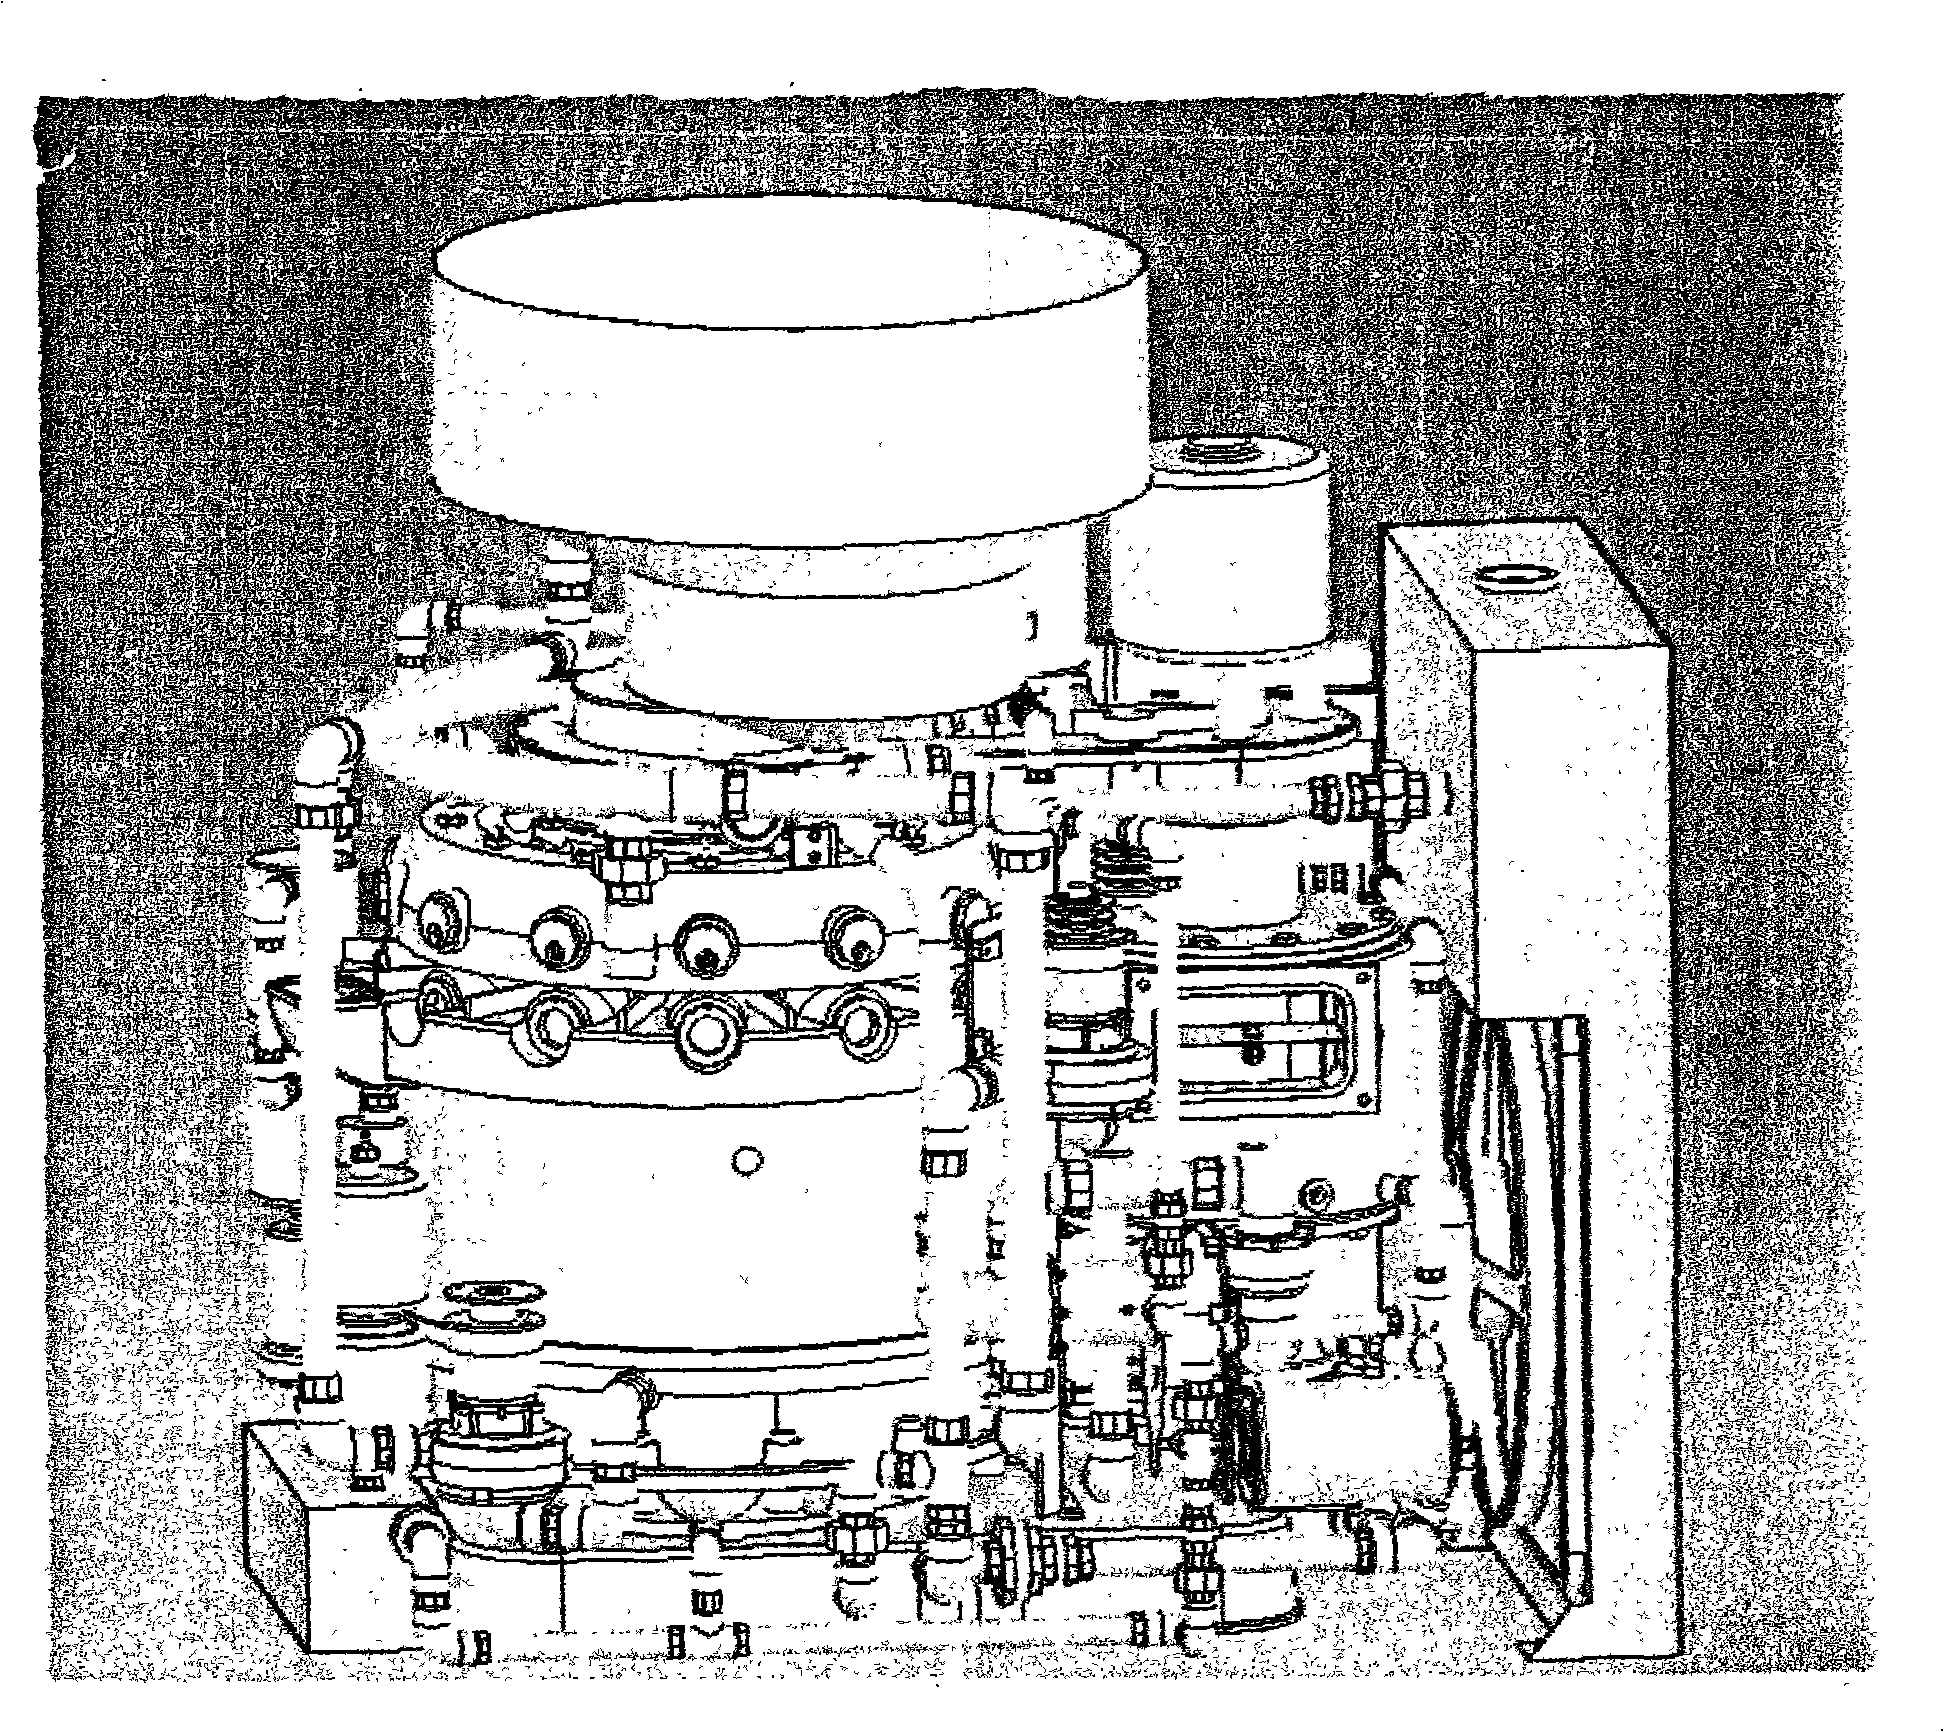 Solid fuel internal-combustion engine